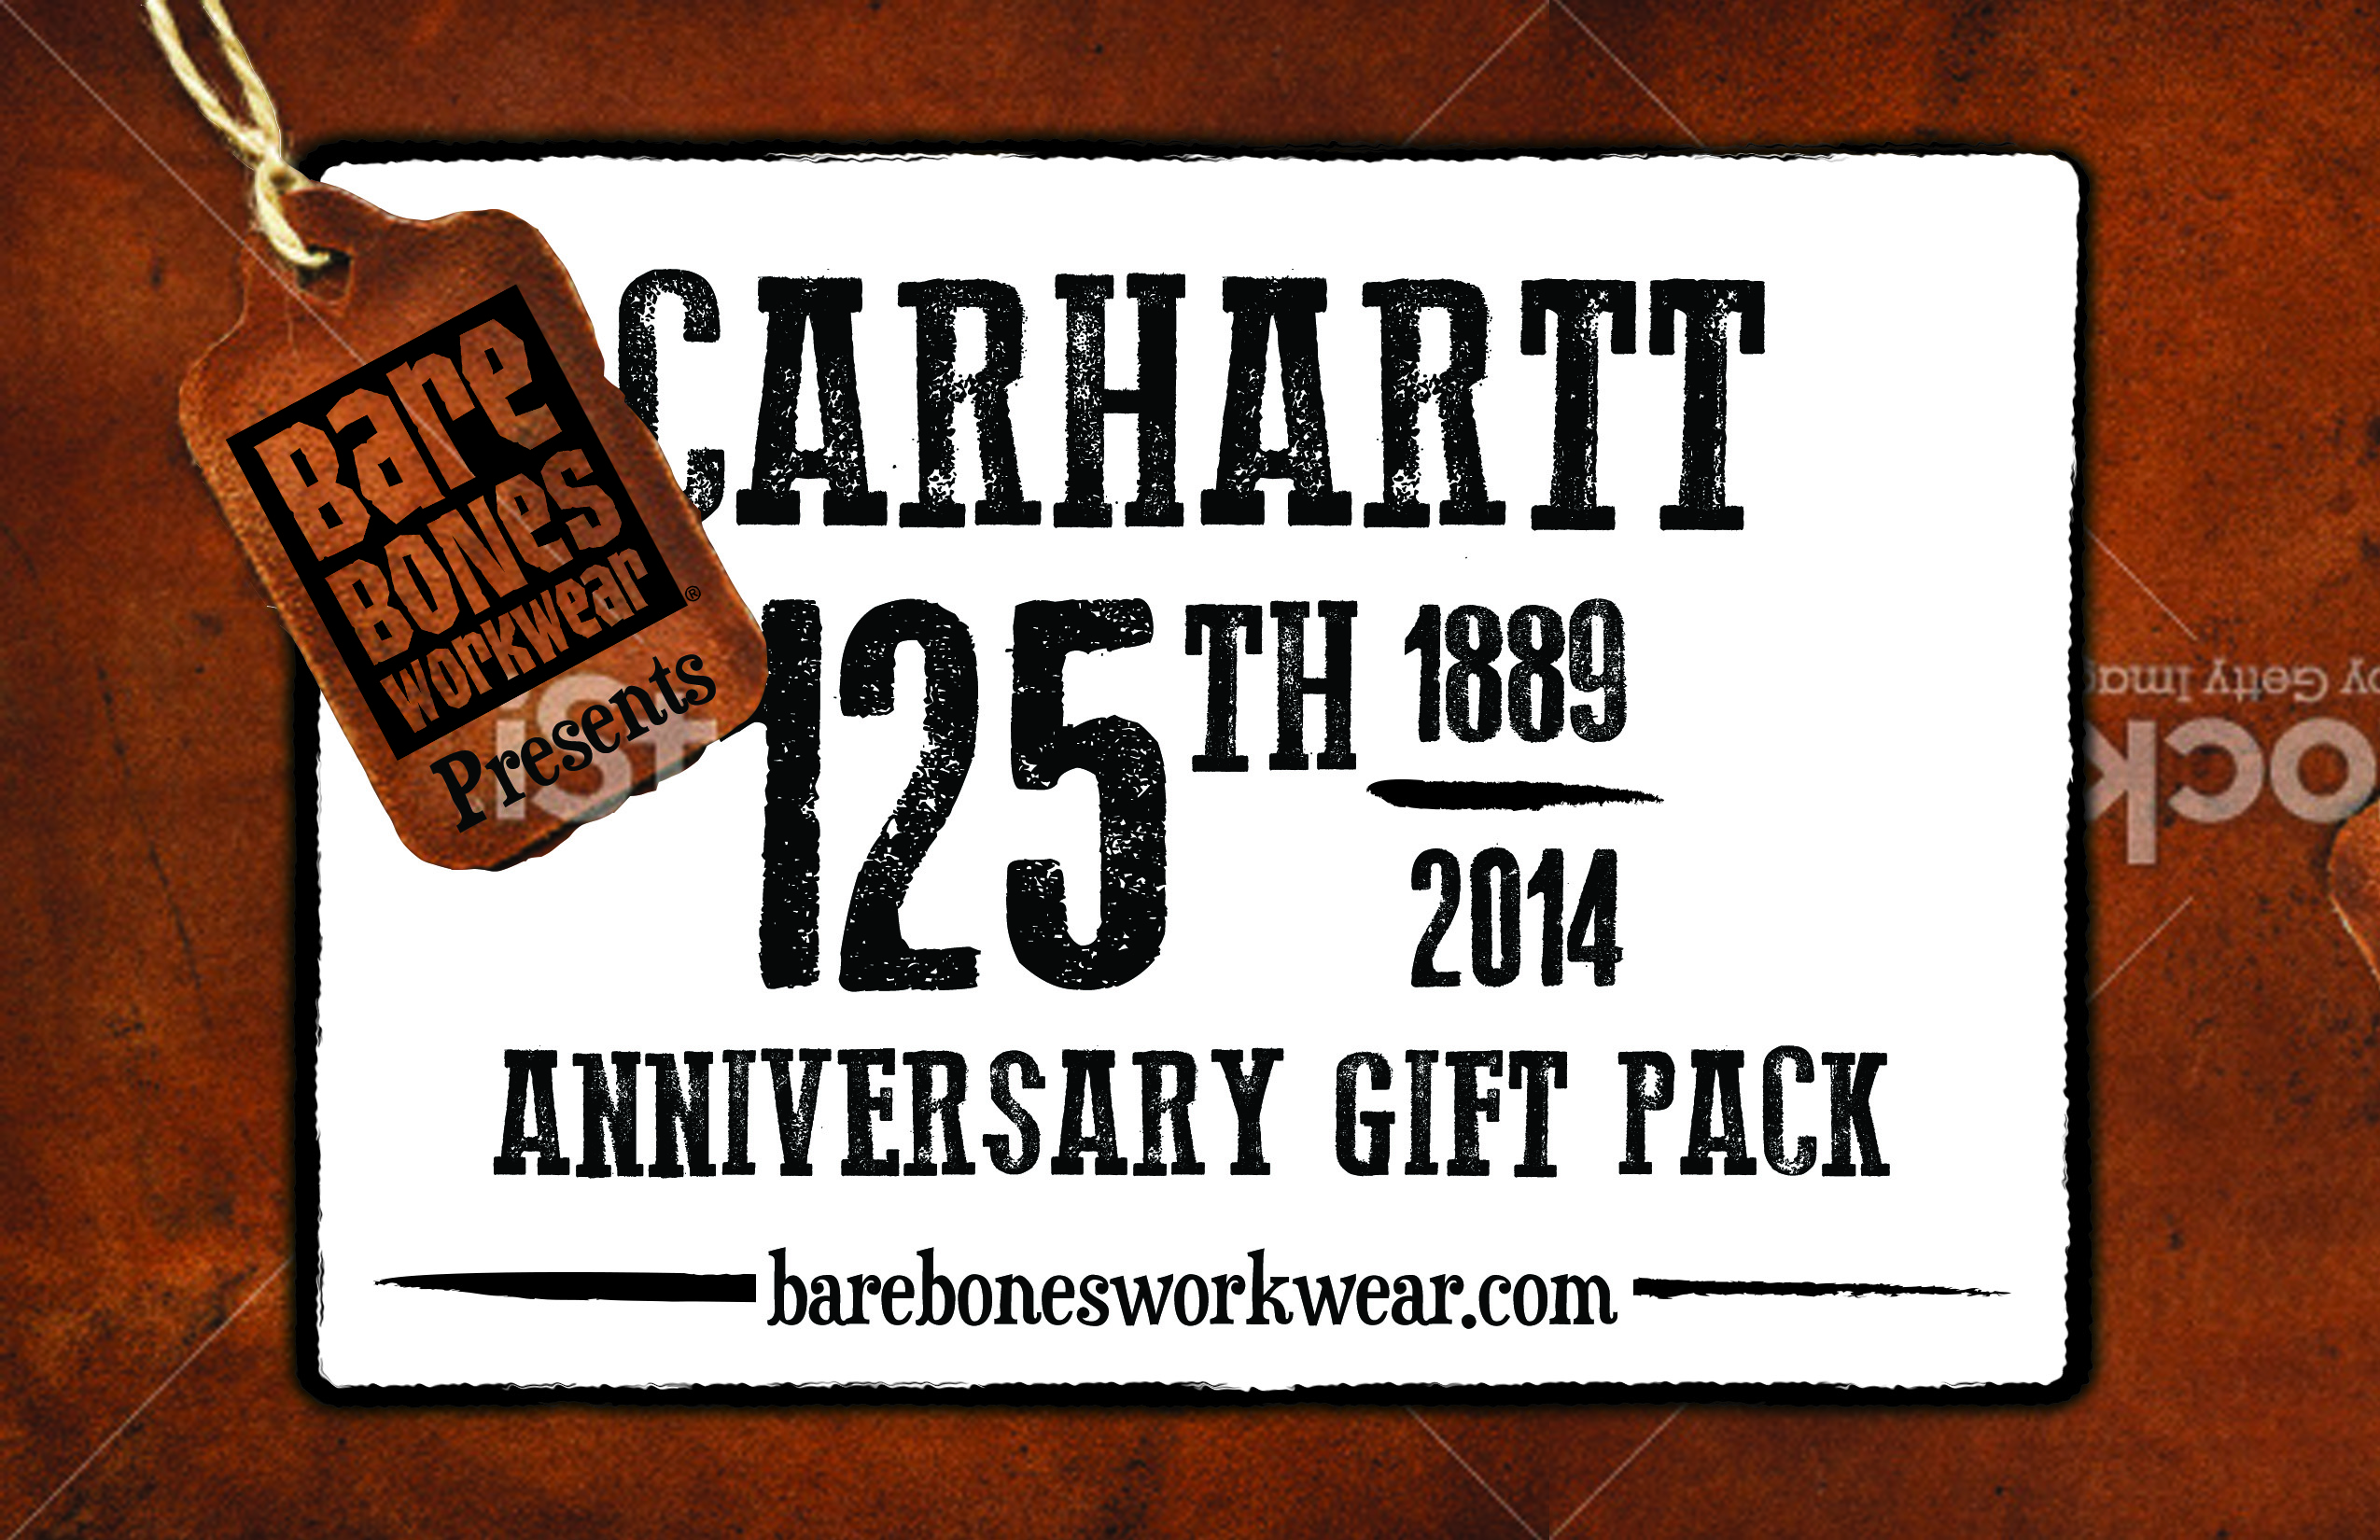 Celebrate 125 years of Carhartt with a six-month gift pack!